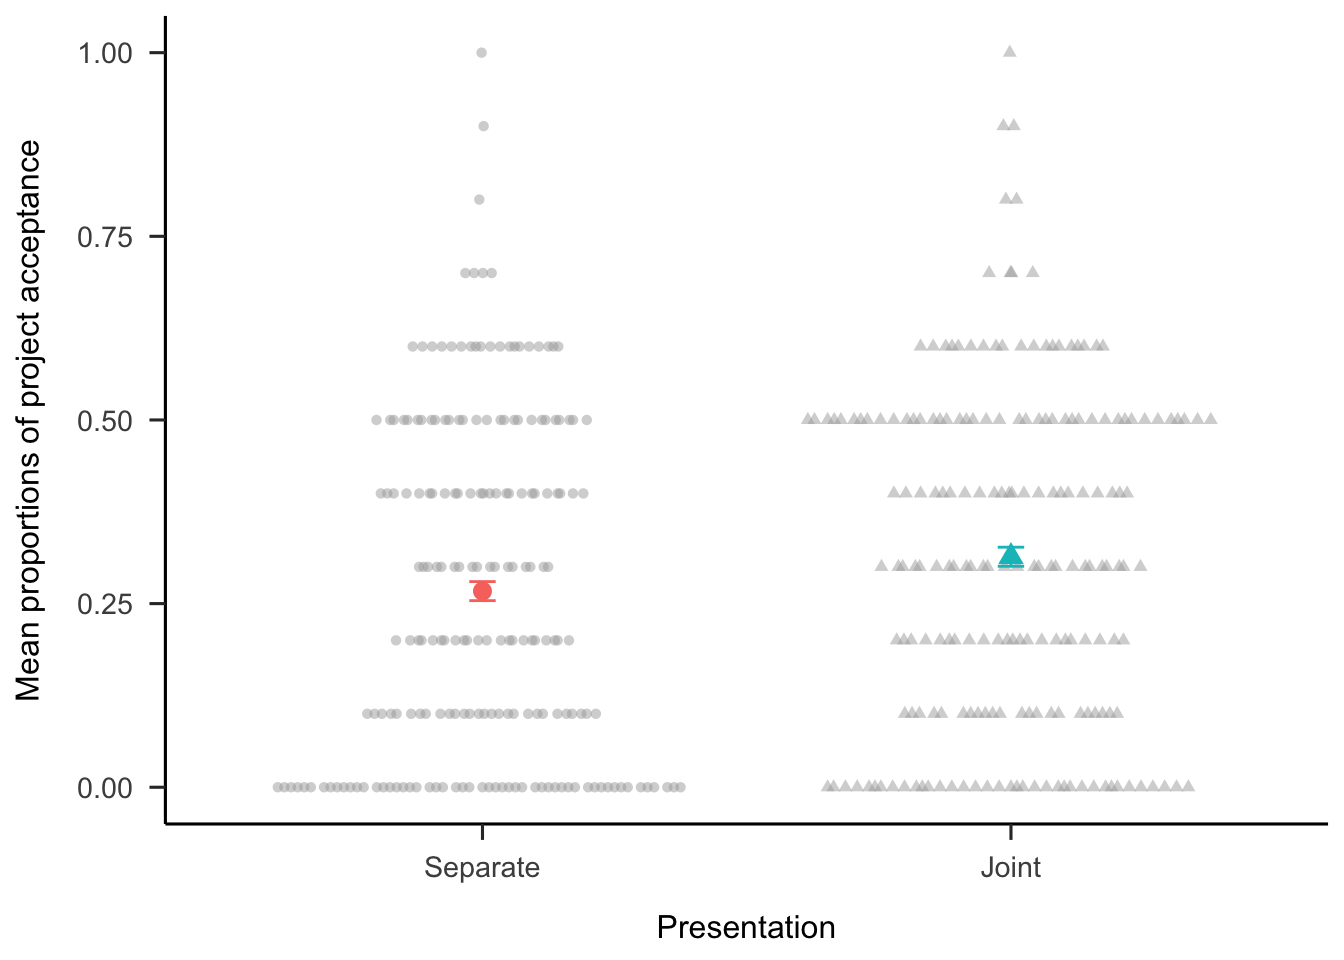 Mean proportions of decisions to invest in each set of 10 projects, by presentation condition. Error bars represent 95% confidence intervals. Here, however, the intervals are so narrow that they are sometimes obscured by the mean indicators in the plot. Raw data are plotted in the background.